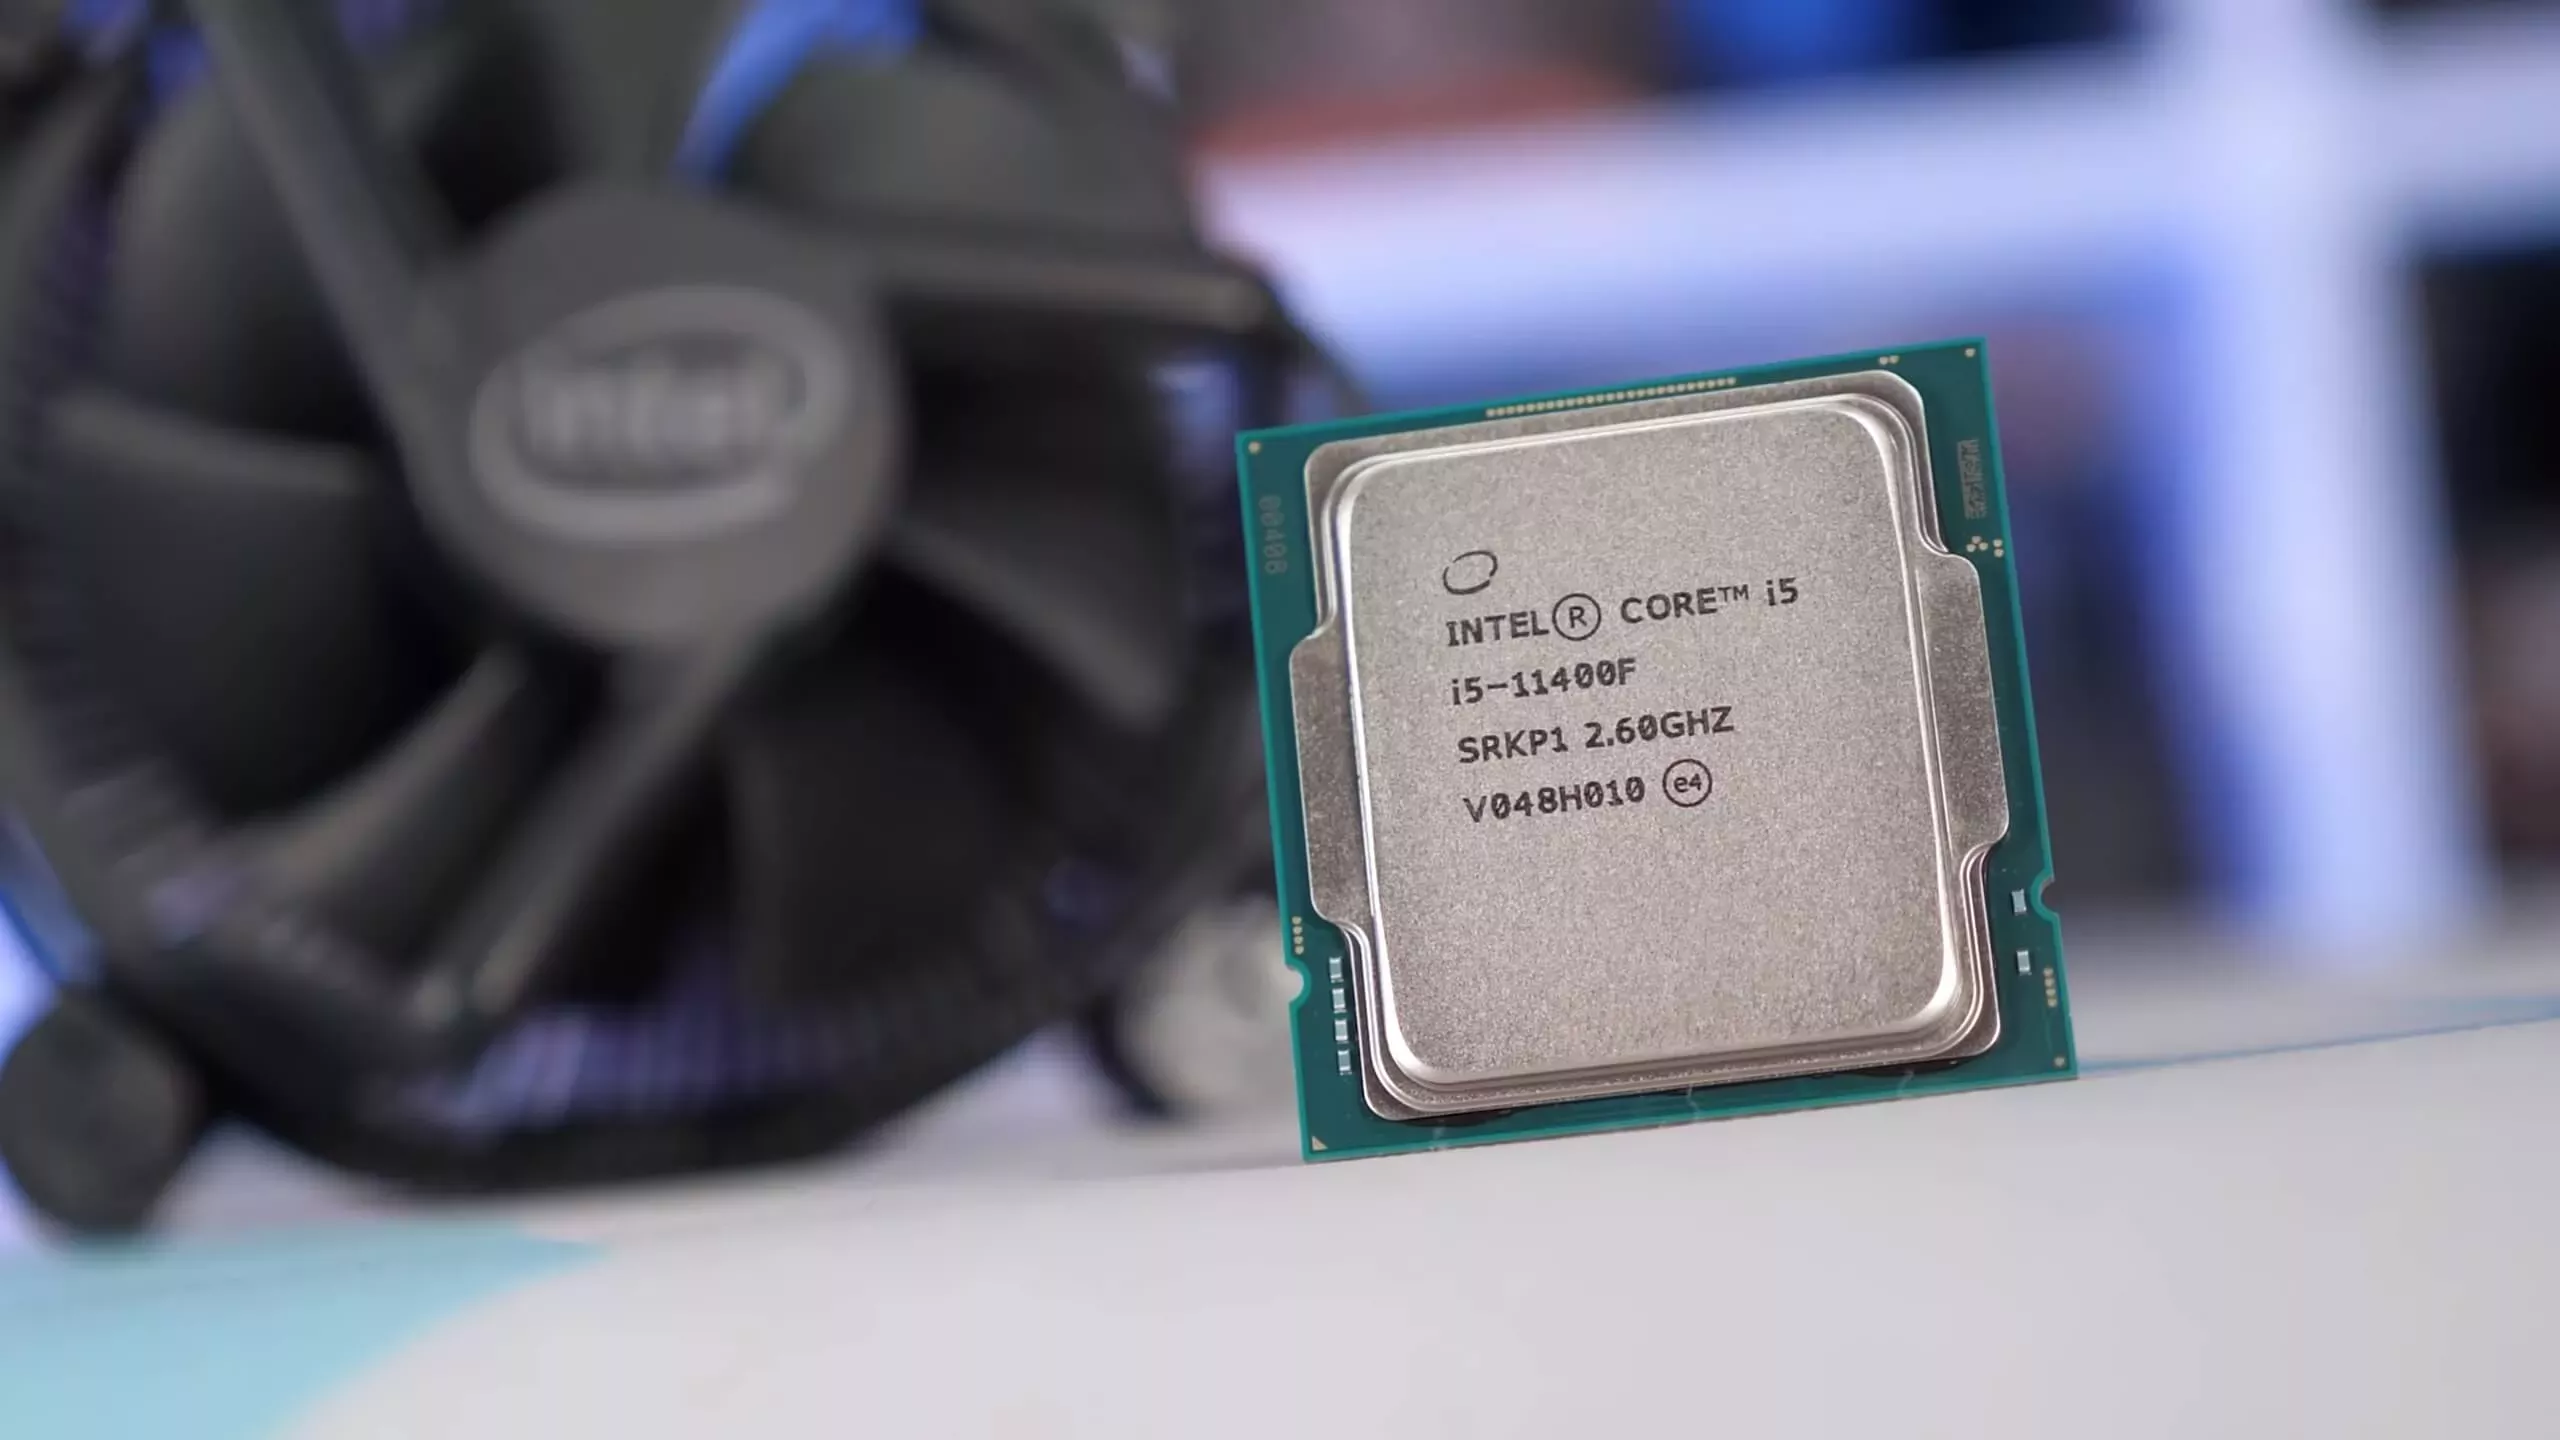 Intel Core i5 11400F Reviews, Pros and Cons | TechSpot